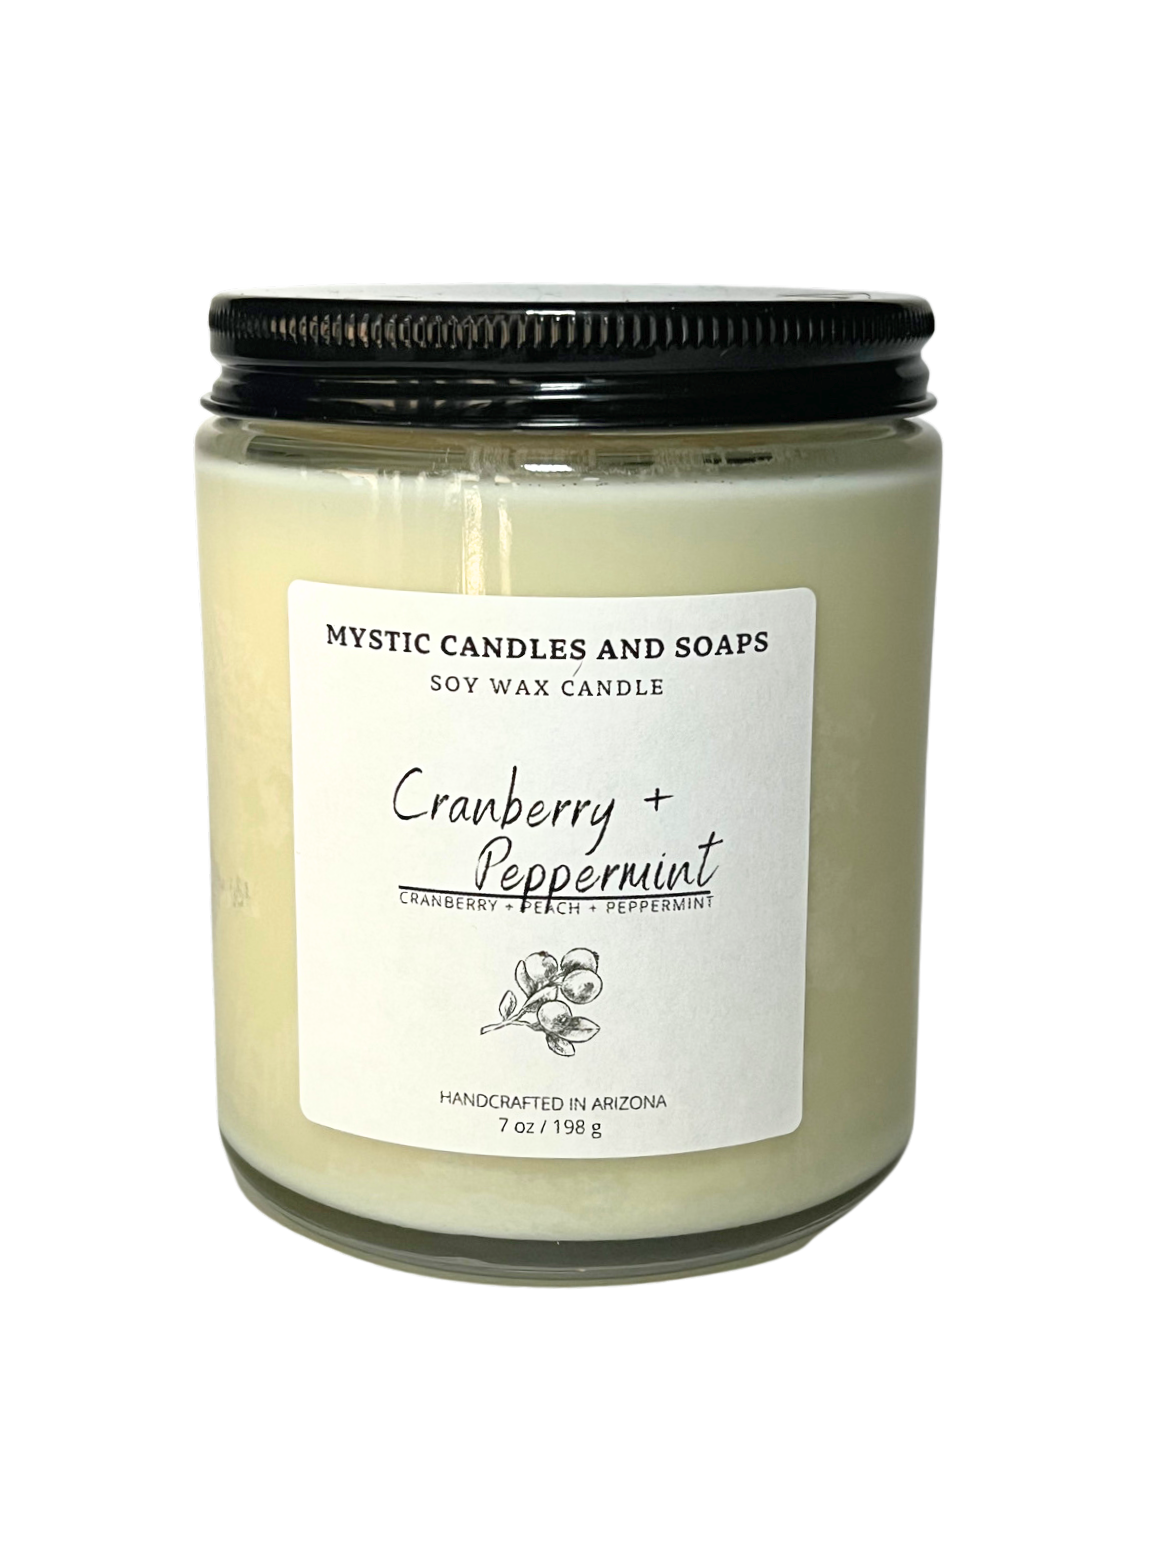 Cranberry & Peppermint Candle - Mystic Candles and Soaps LLC